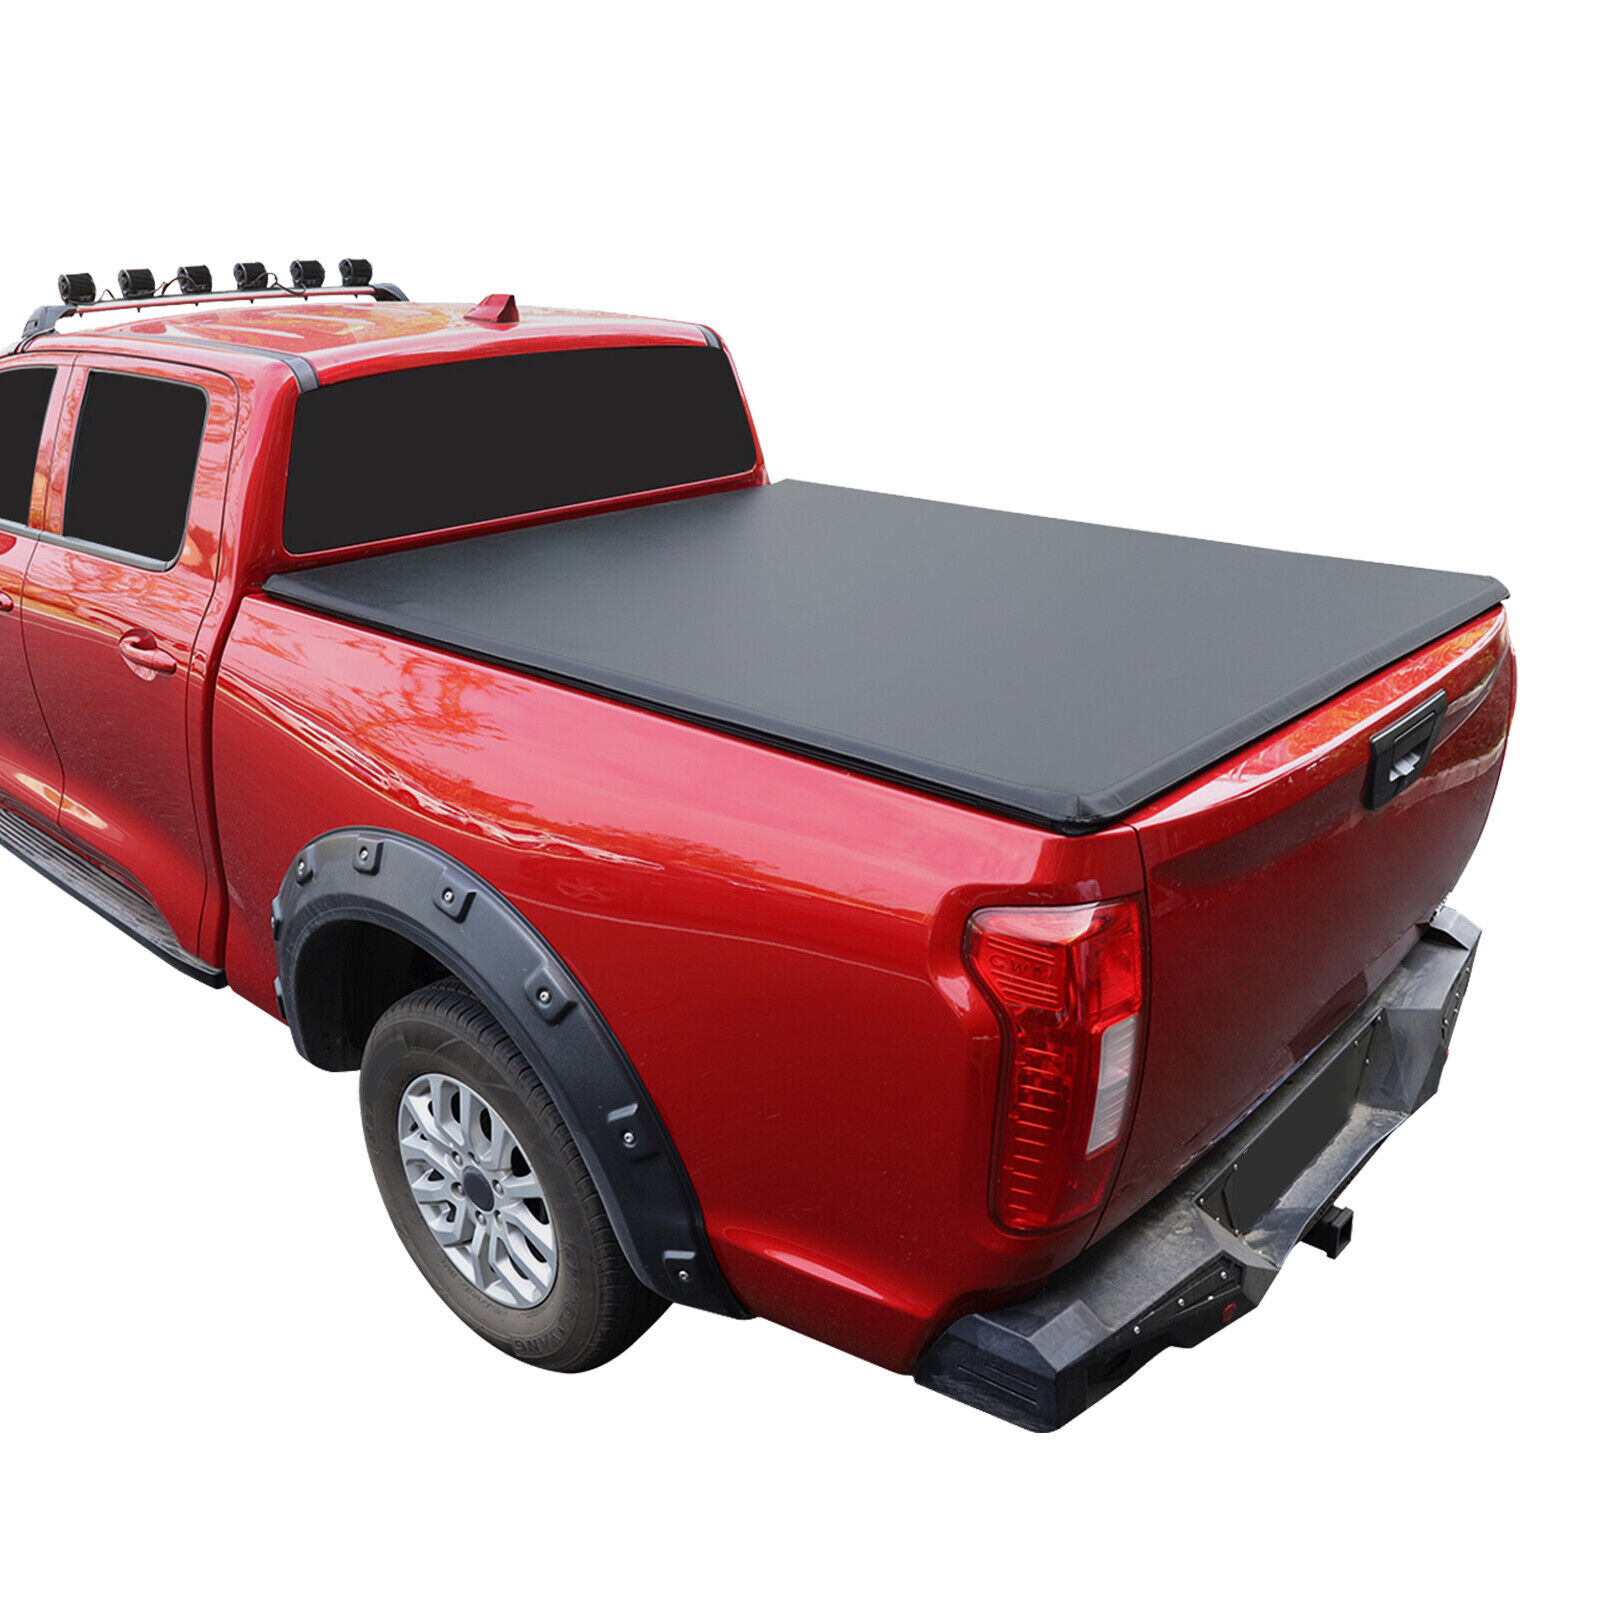 Soft Roll Up Tonneau Cover for 2002-2022 Ram 1500 Bed Length 6.4ft Black